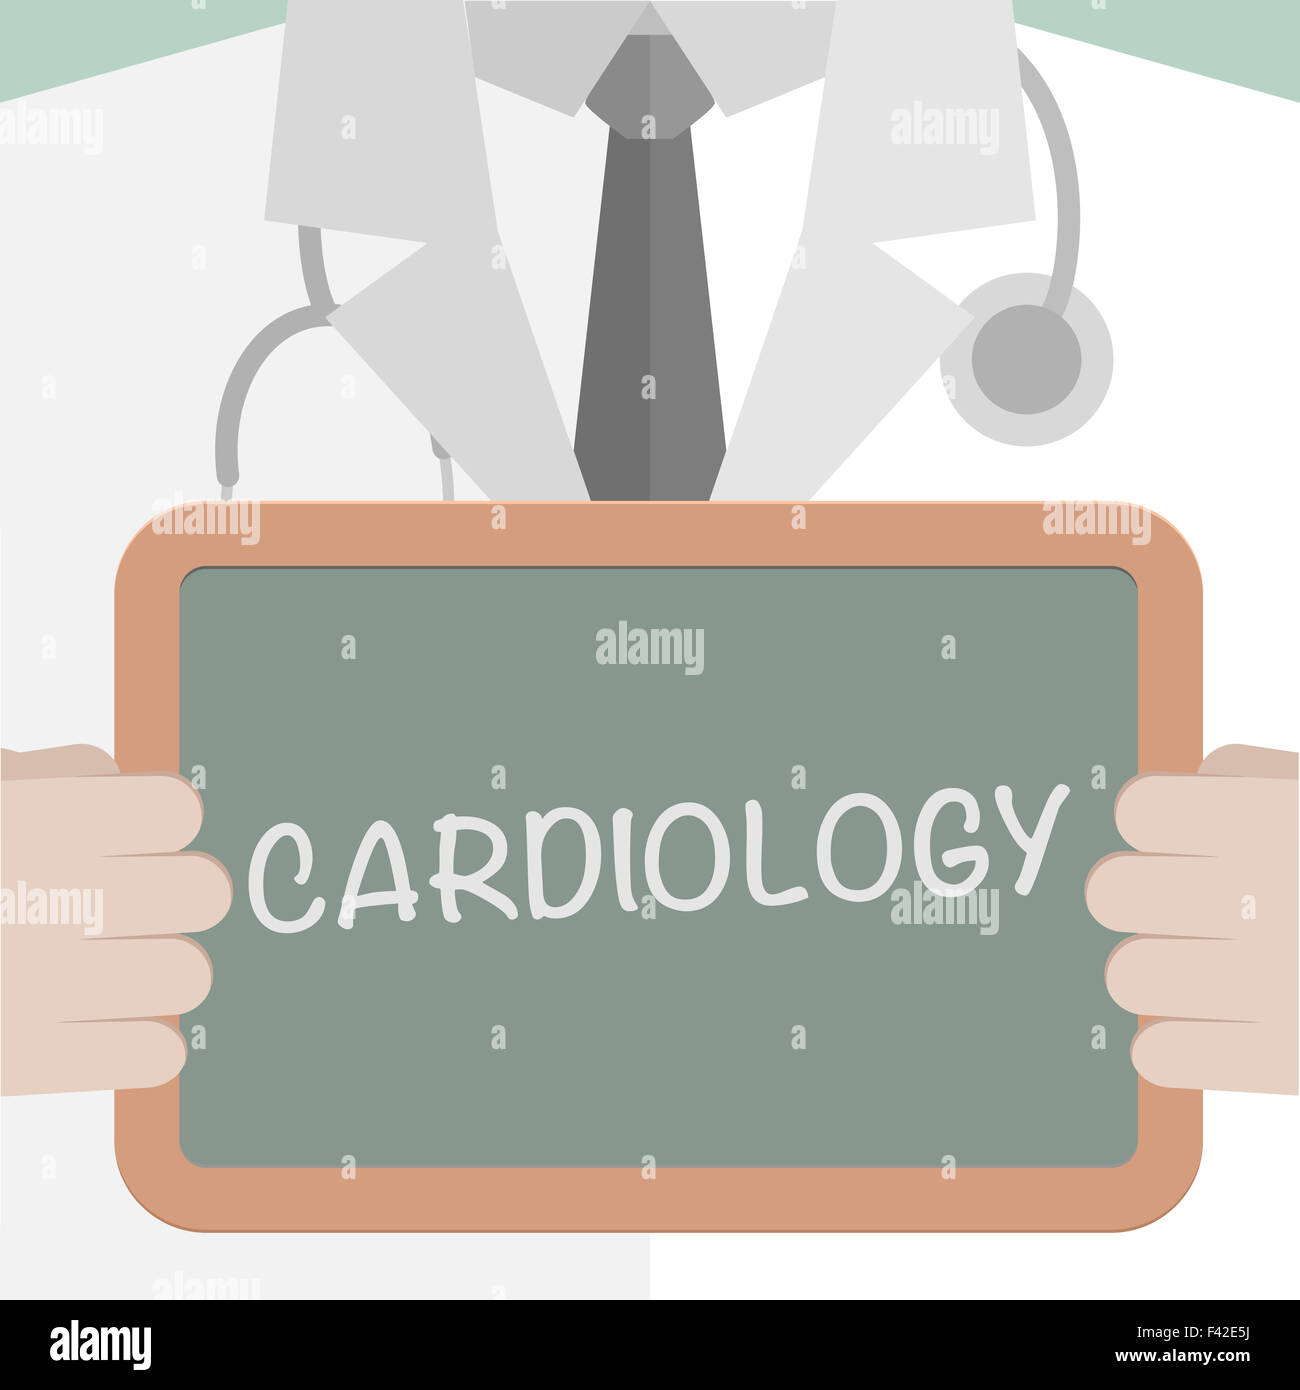 Medical Board Cardiology Stock Photo